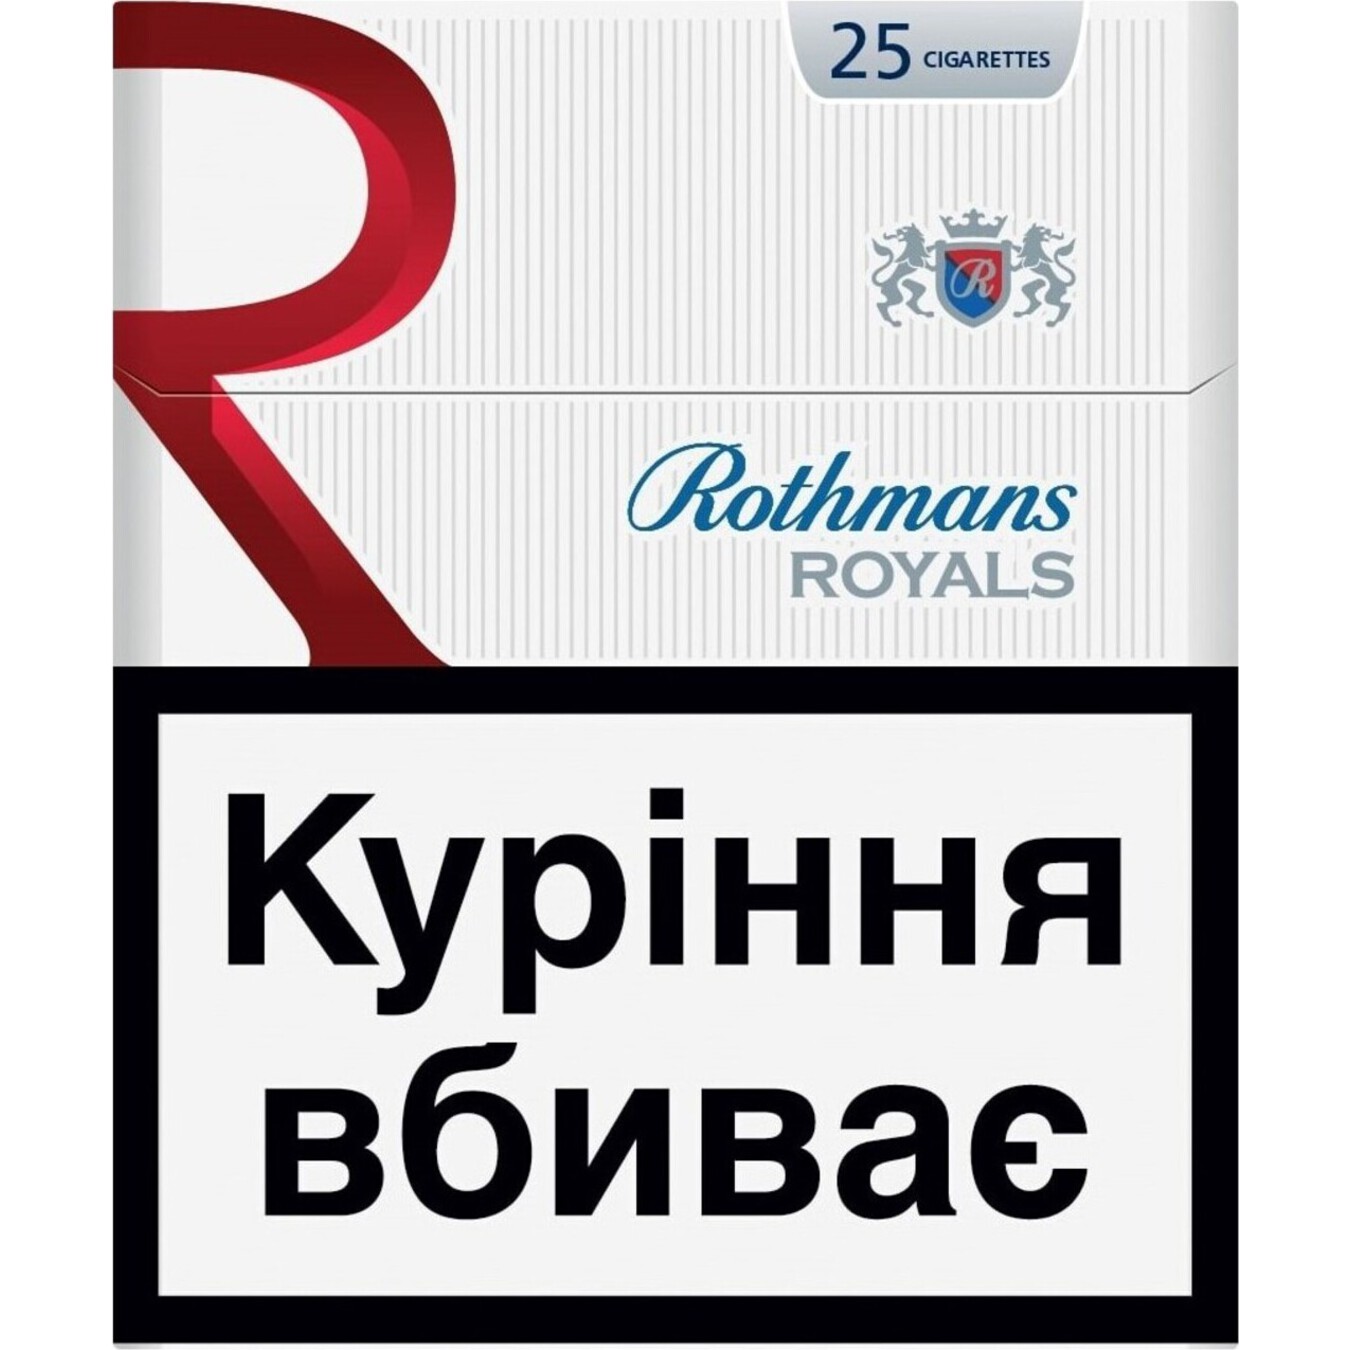 Rothmans Royals Red Cigarettes 25pcs (the price is indicated without excise tax)